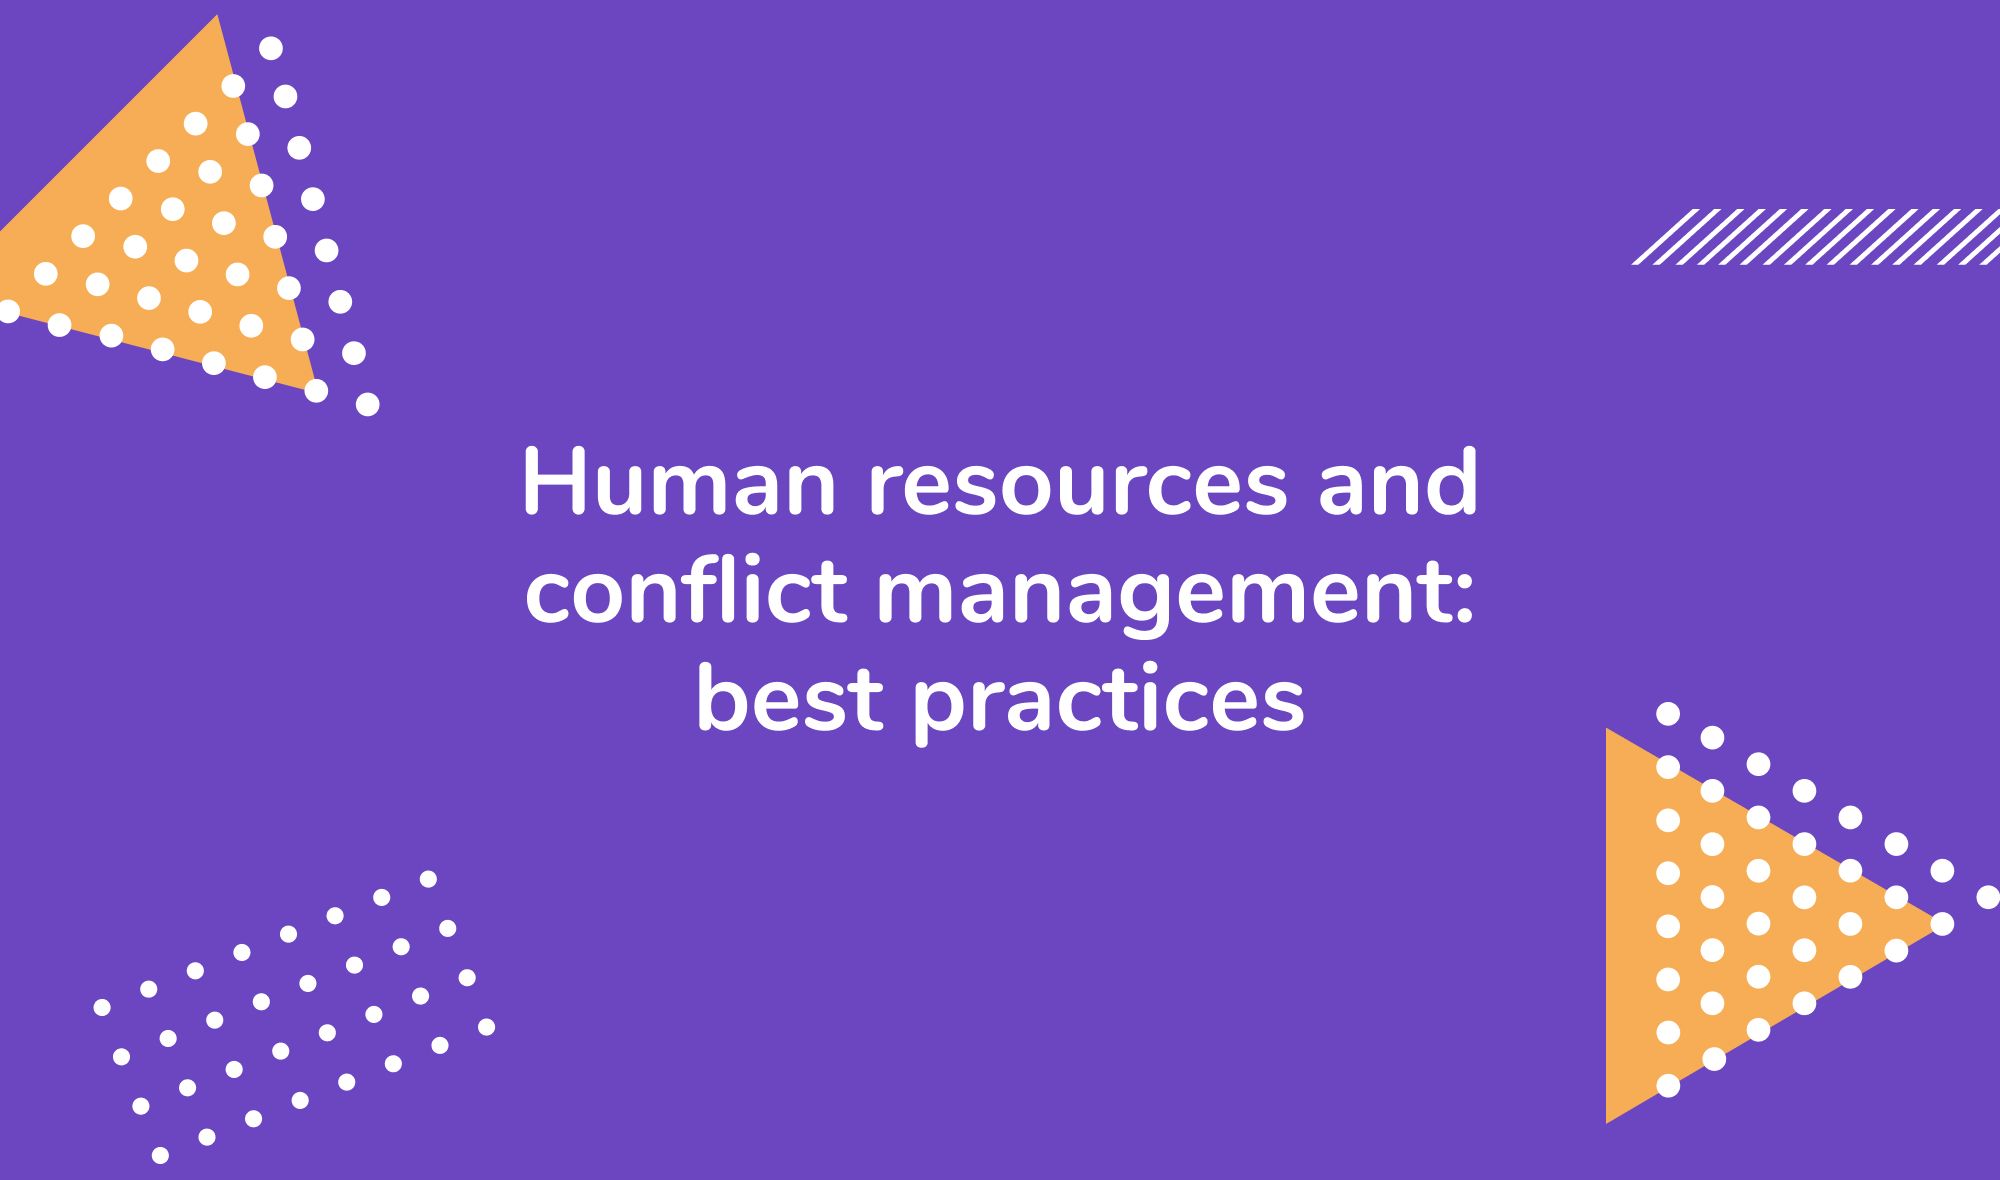 Human resources and conflict management: best practices